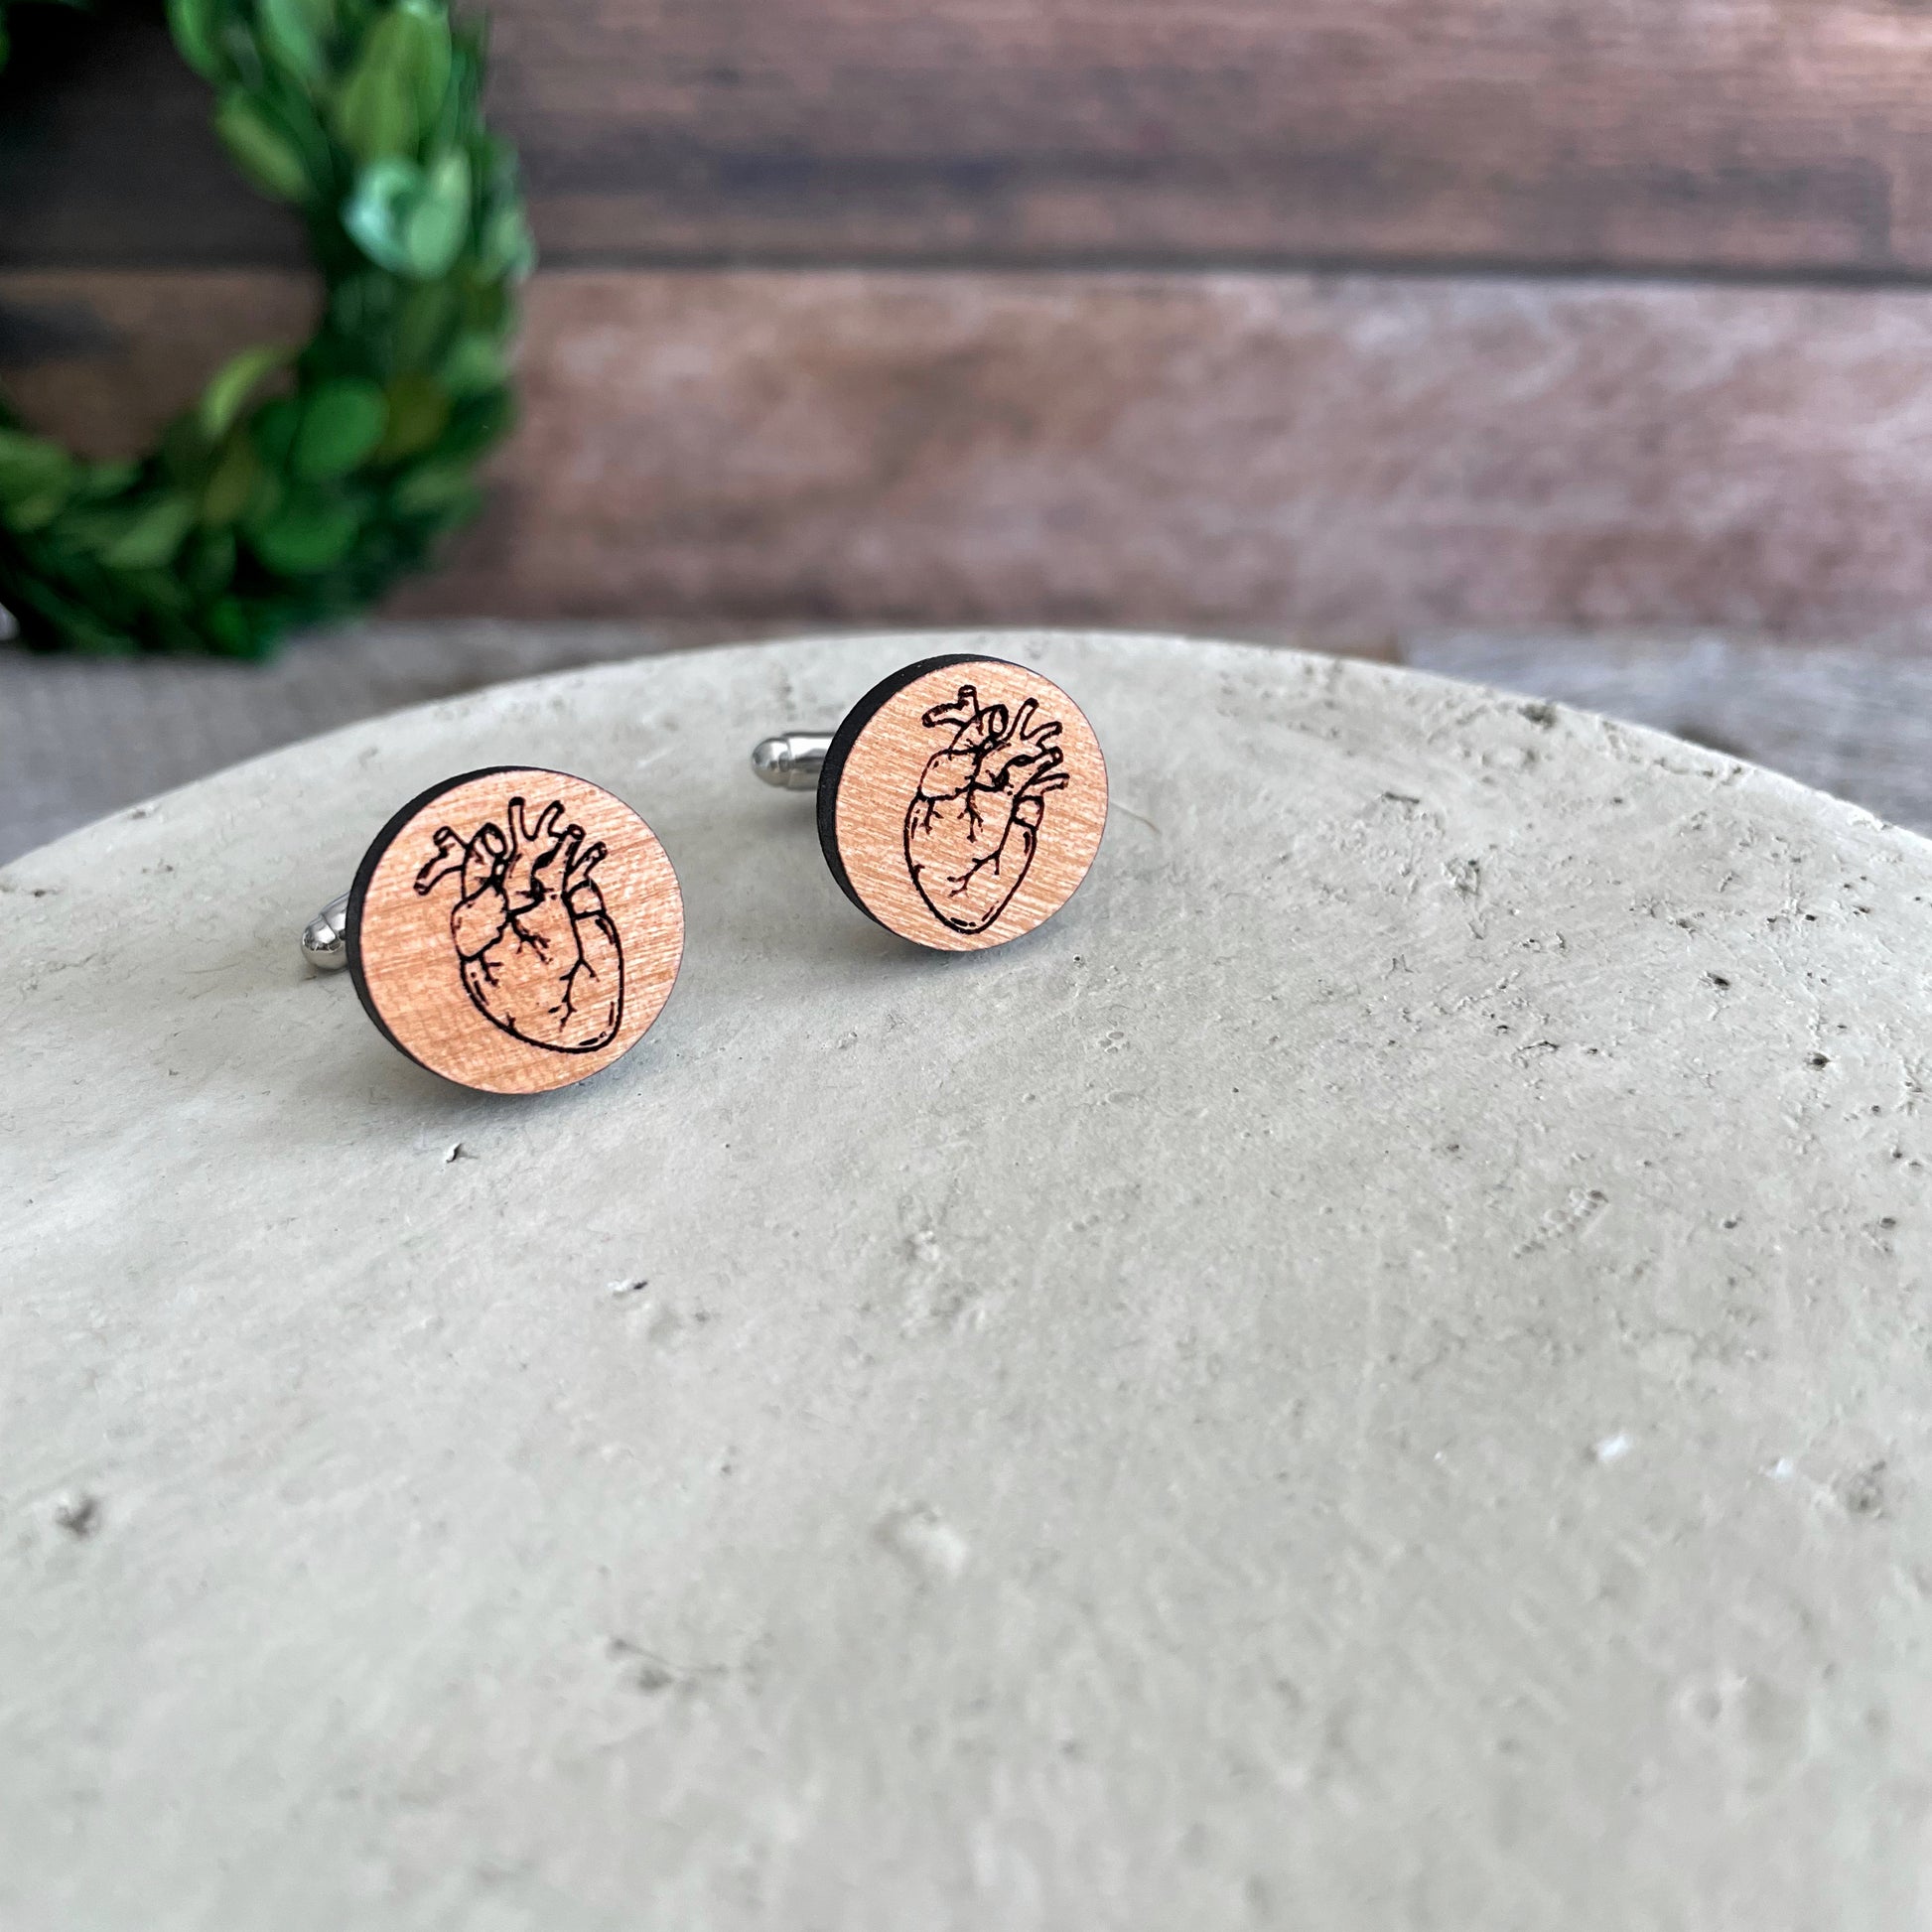 Laser engraved wooden cufflinks with a drawing of a heart